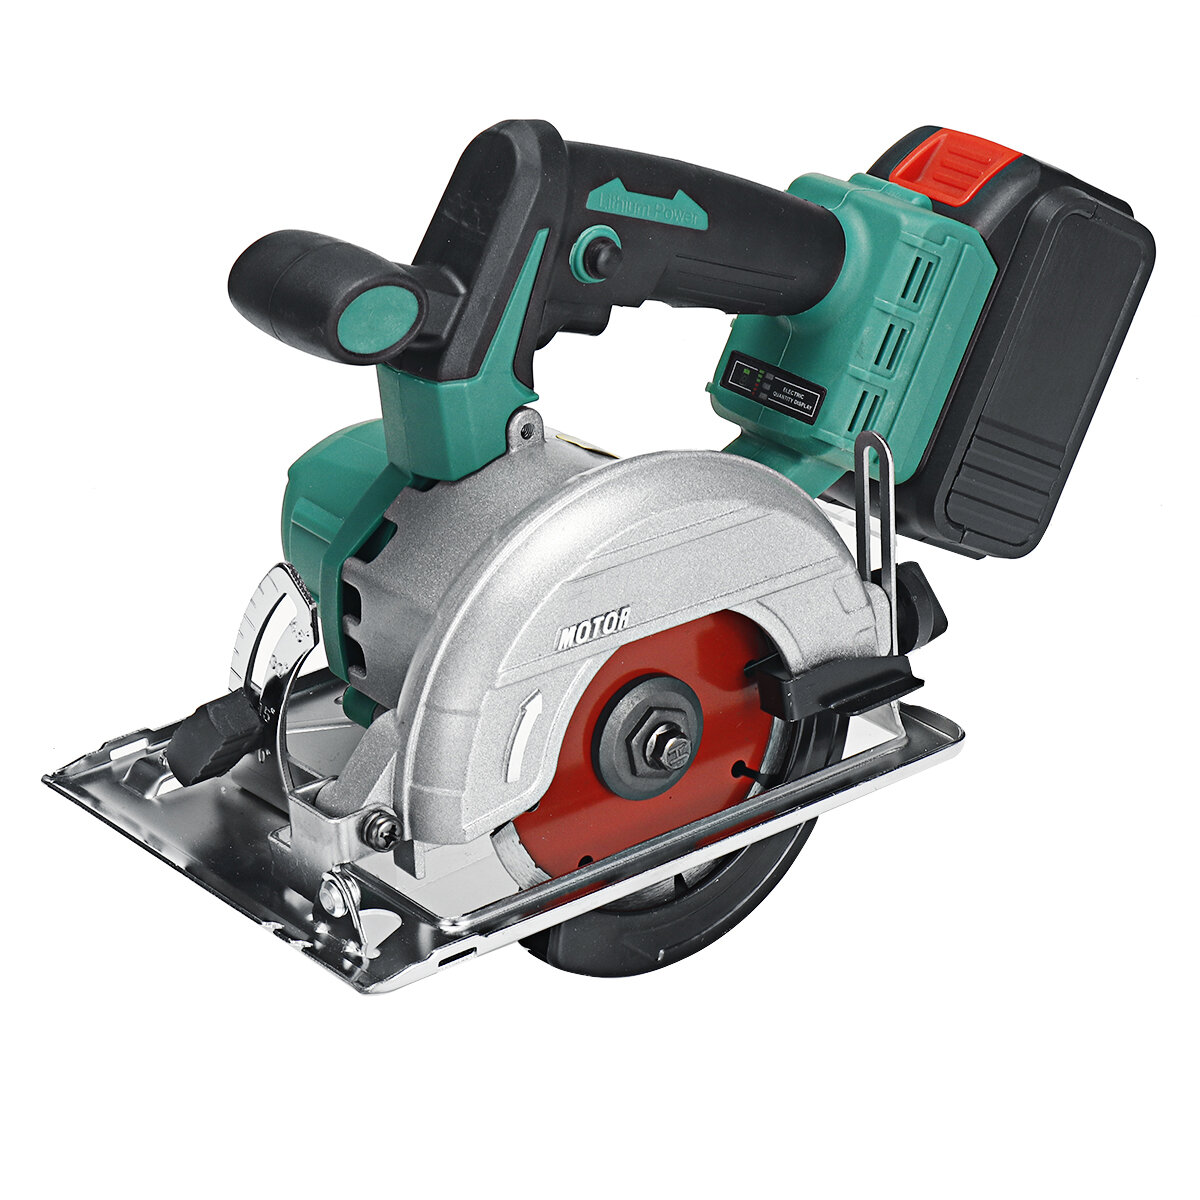 Electric Circular Saw Lithium Brushless Circular Saw Household Rechargeable Portable Cutting Machine